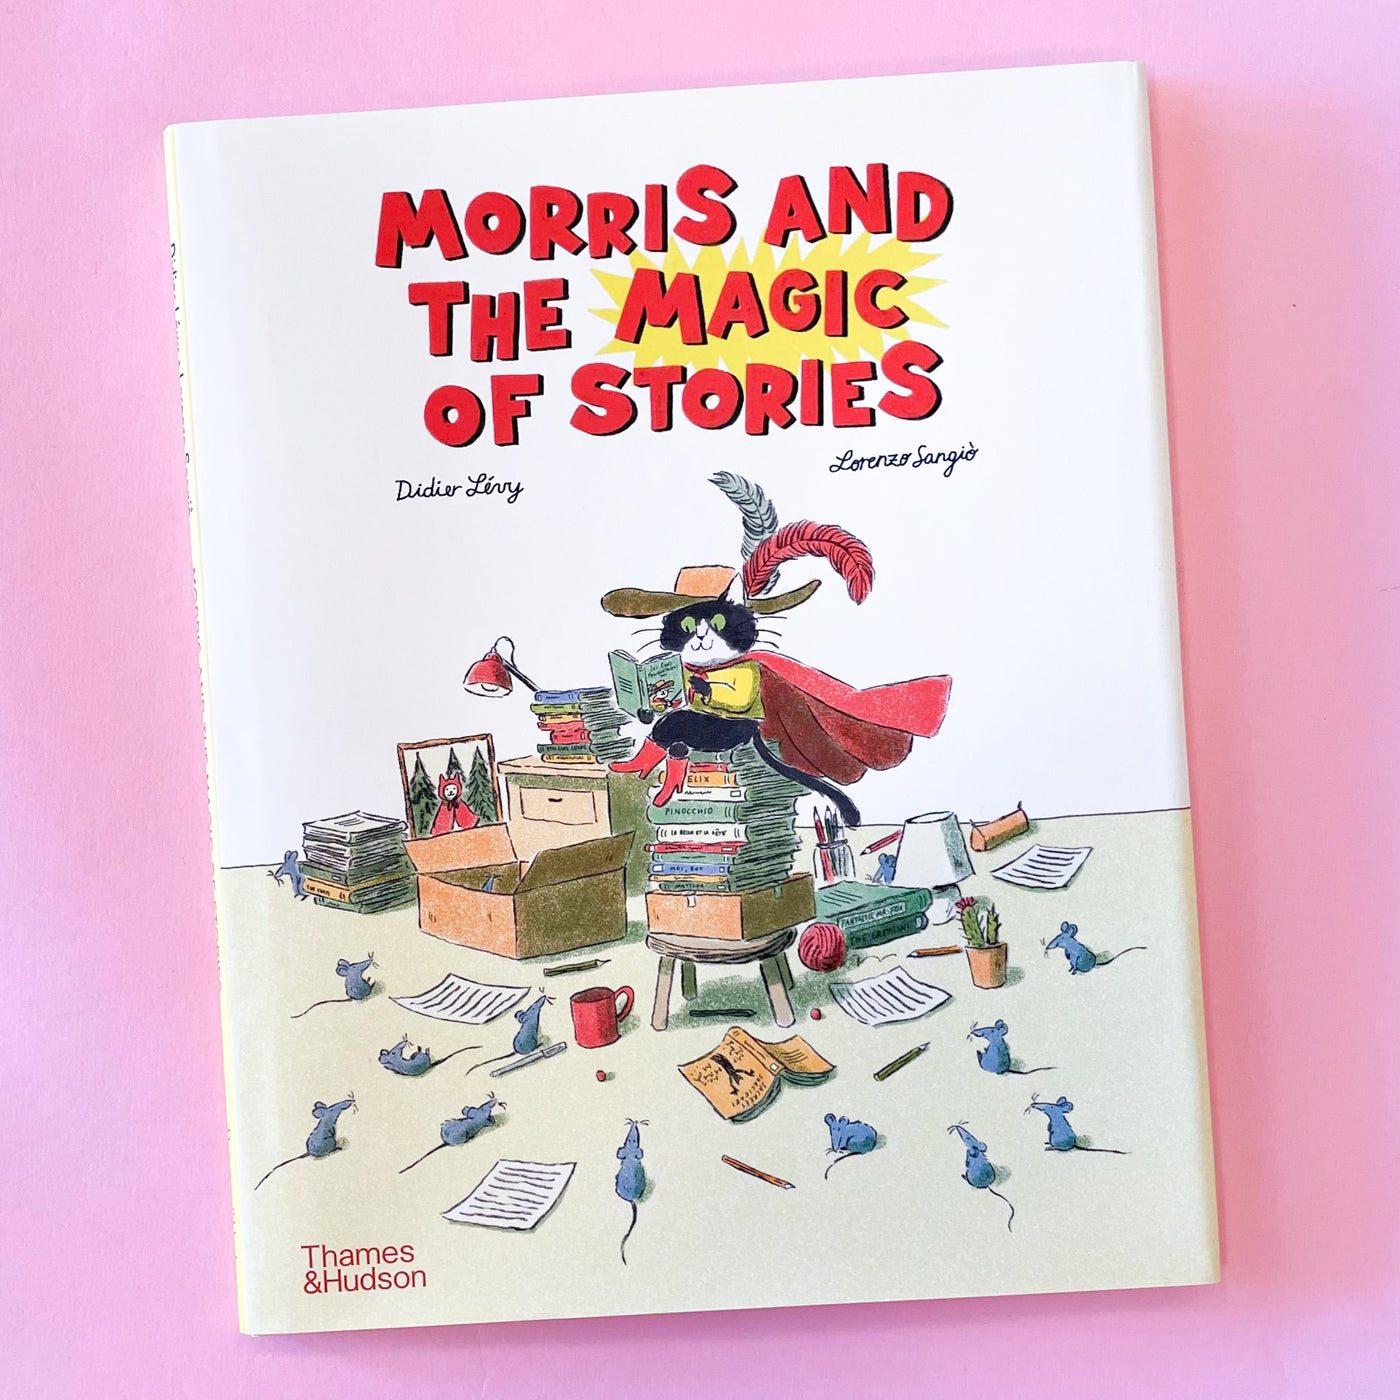 Morris and the Magic of Stories by Didier Lévy and Lorenzo Sangio